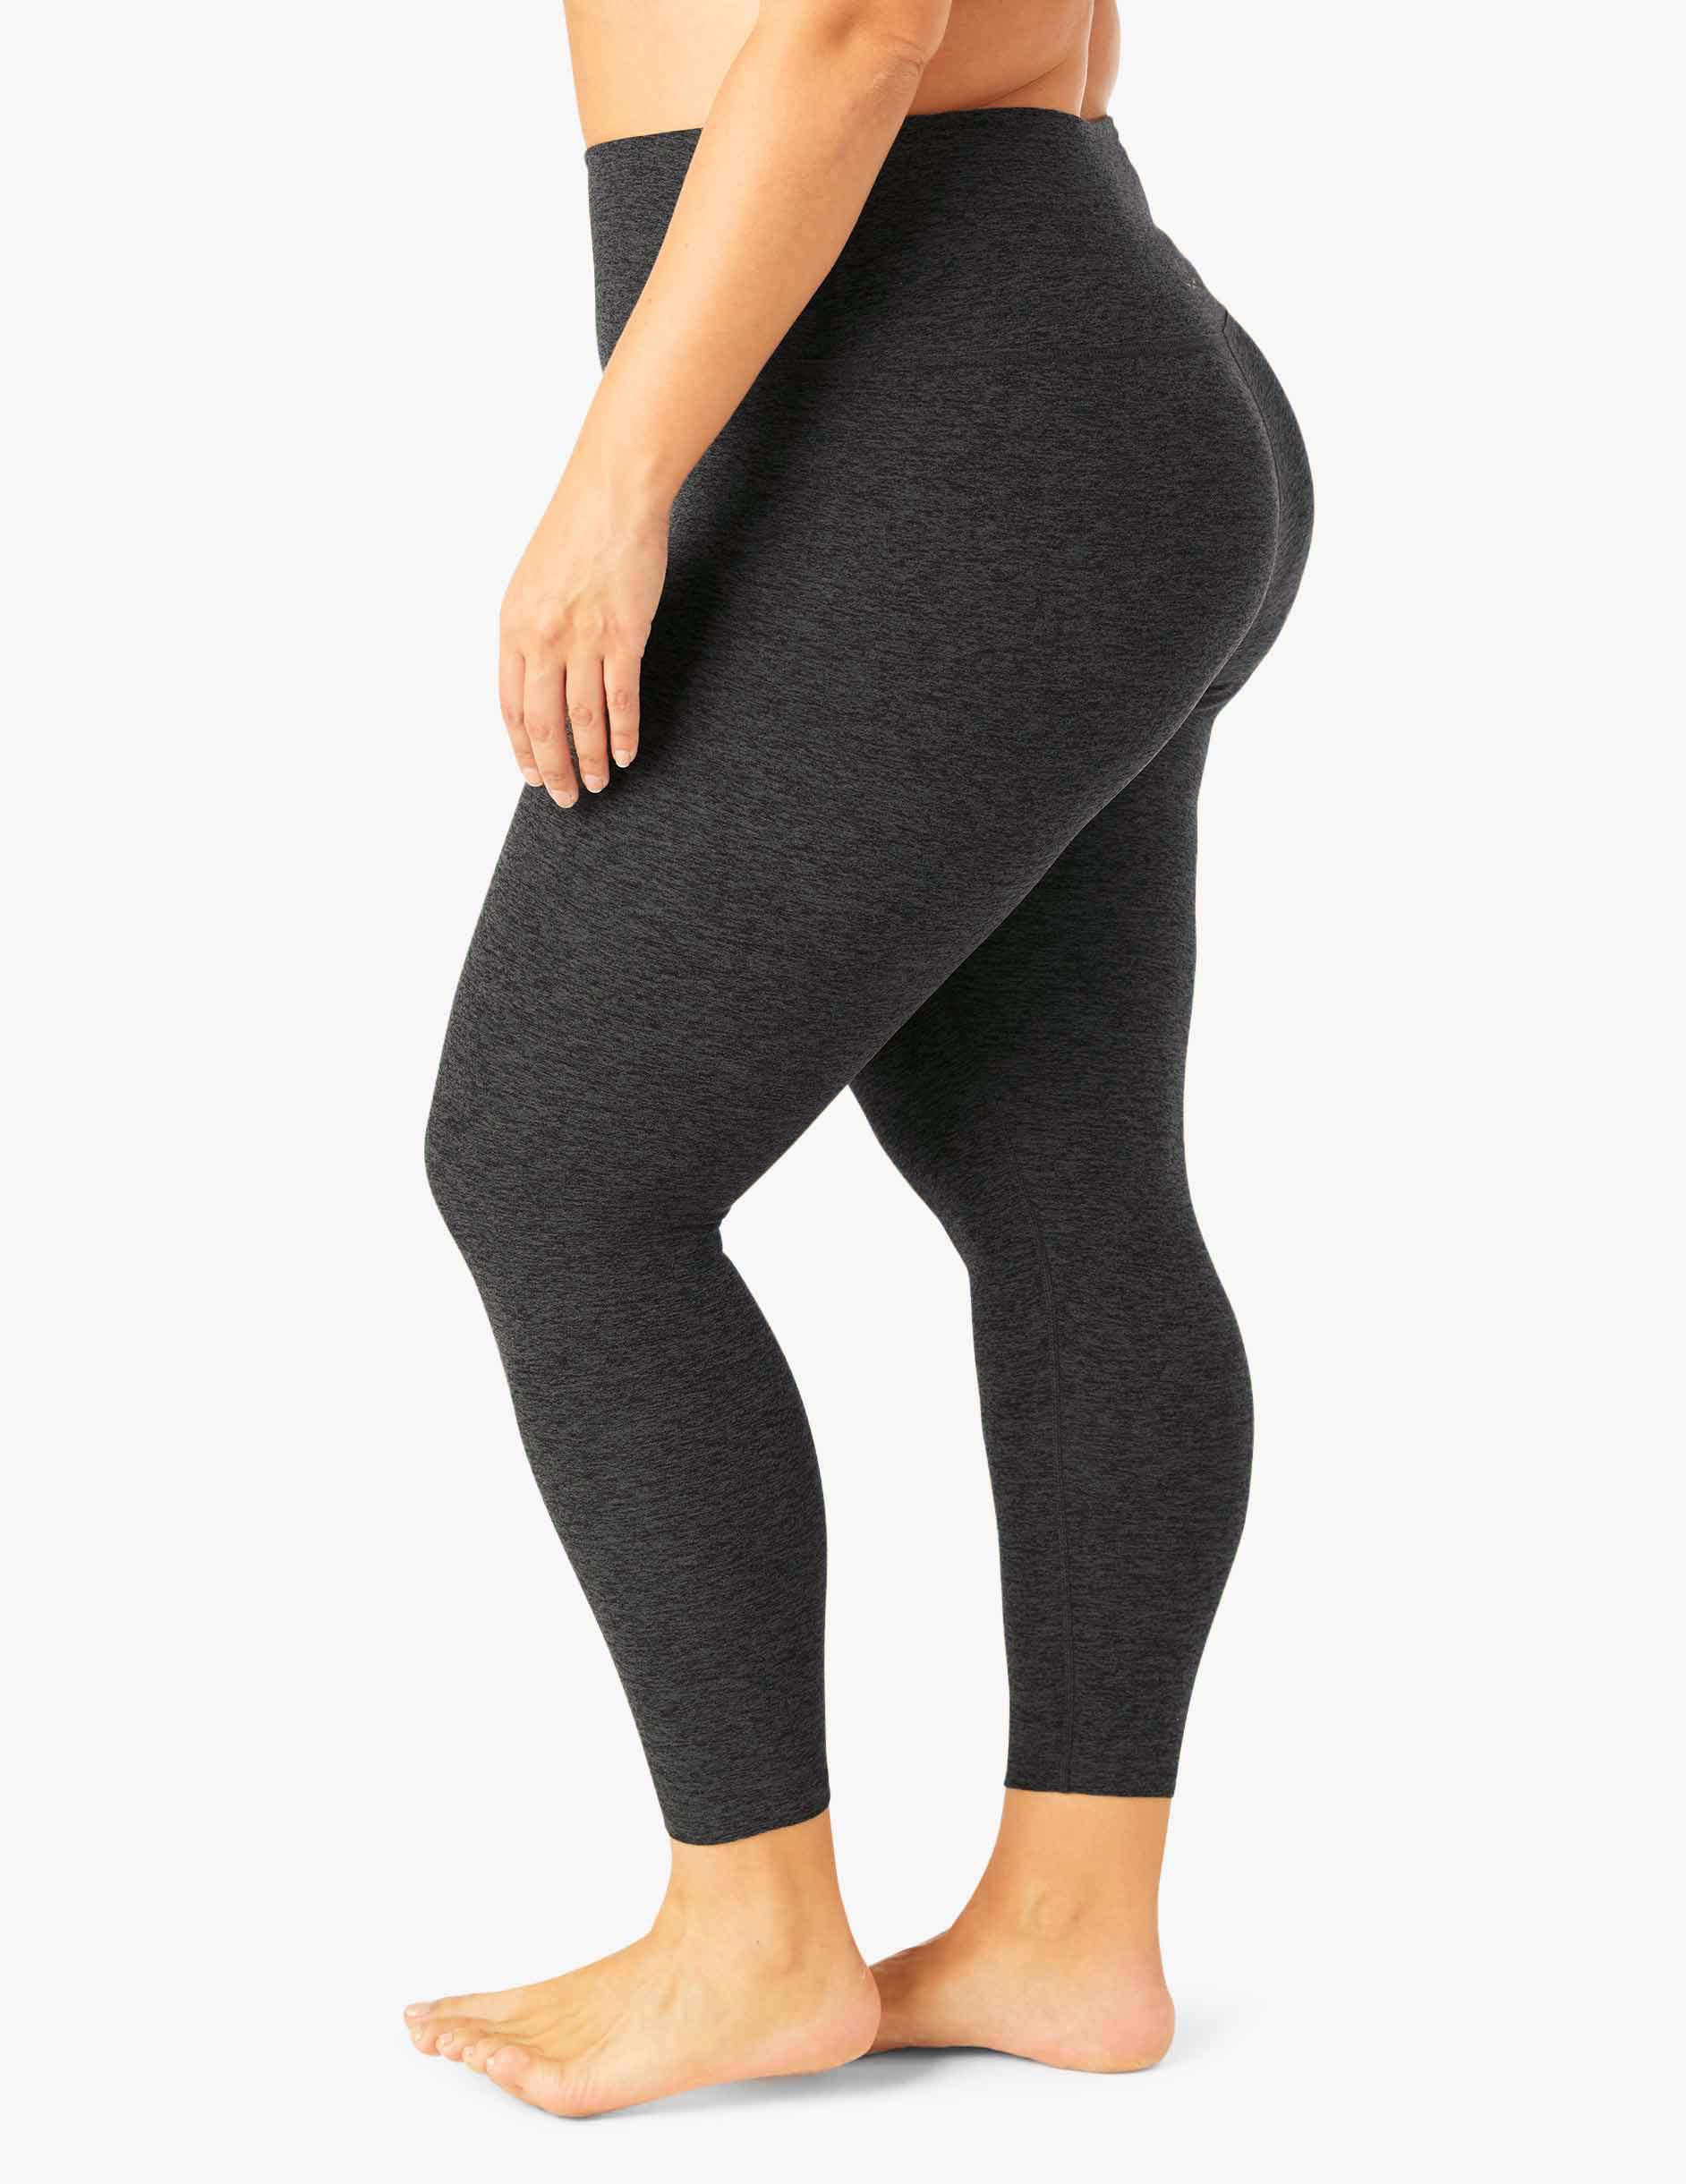 Beyond Yoga Leggings: Alloy Ombré High-Waisted Midi & Spacedye Sheer  Illusion High-Waisted Midi, All the Best Health and Fitness Products to  Help You Have the Best Summer Ever